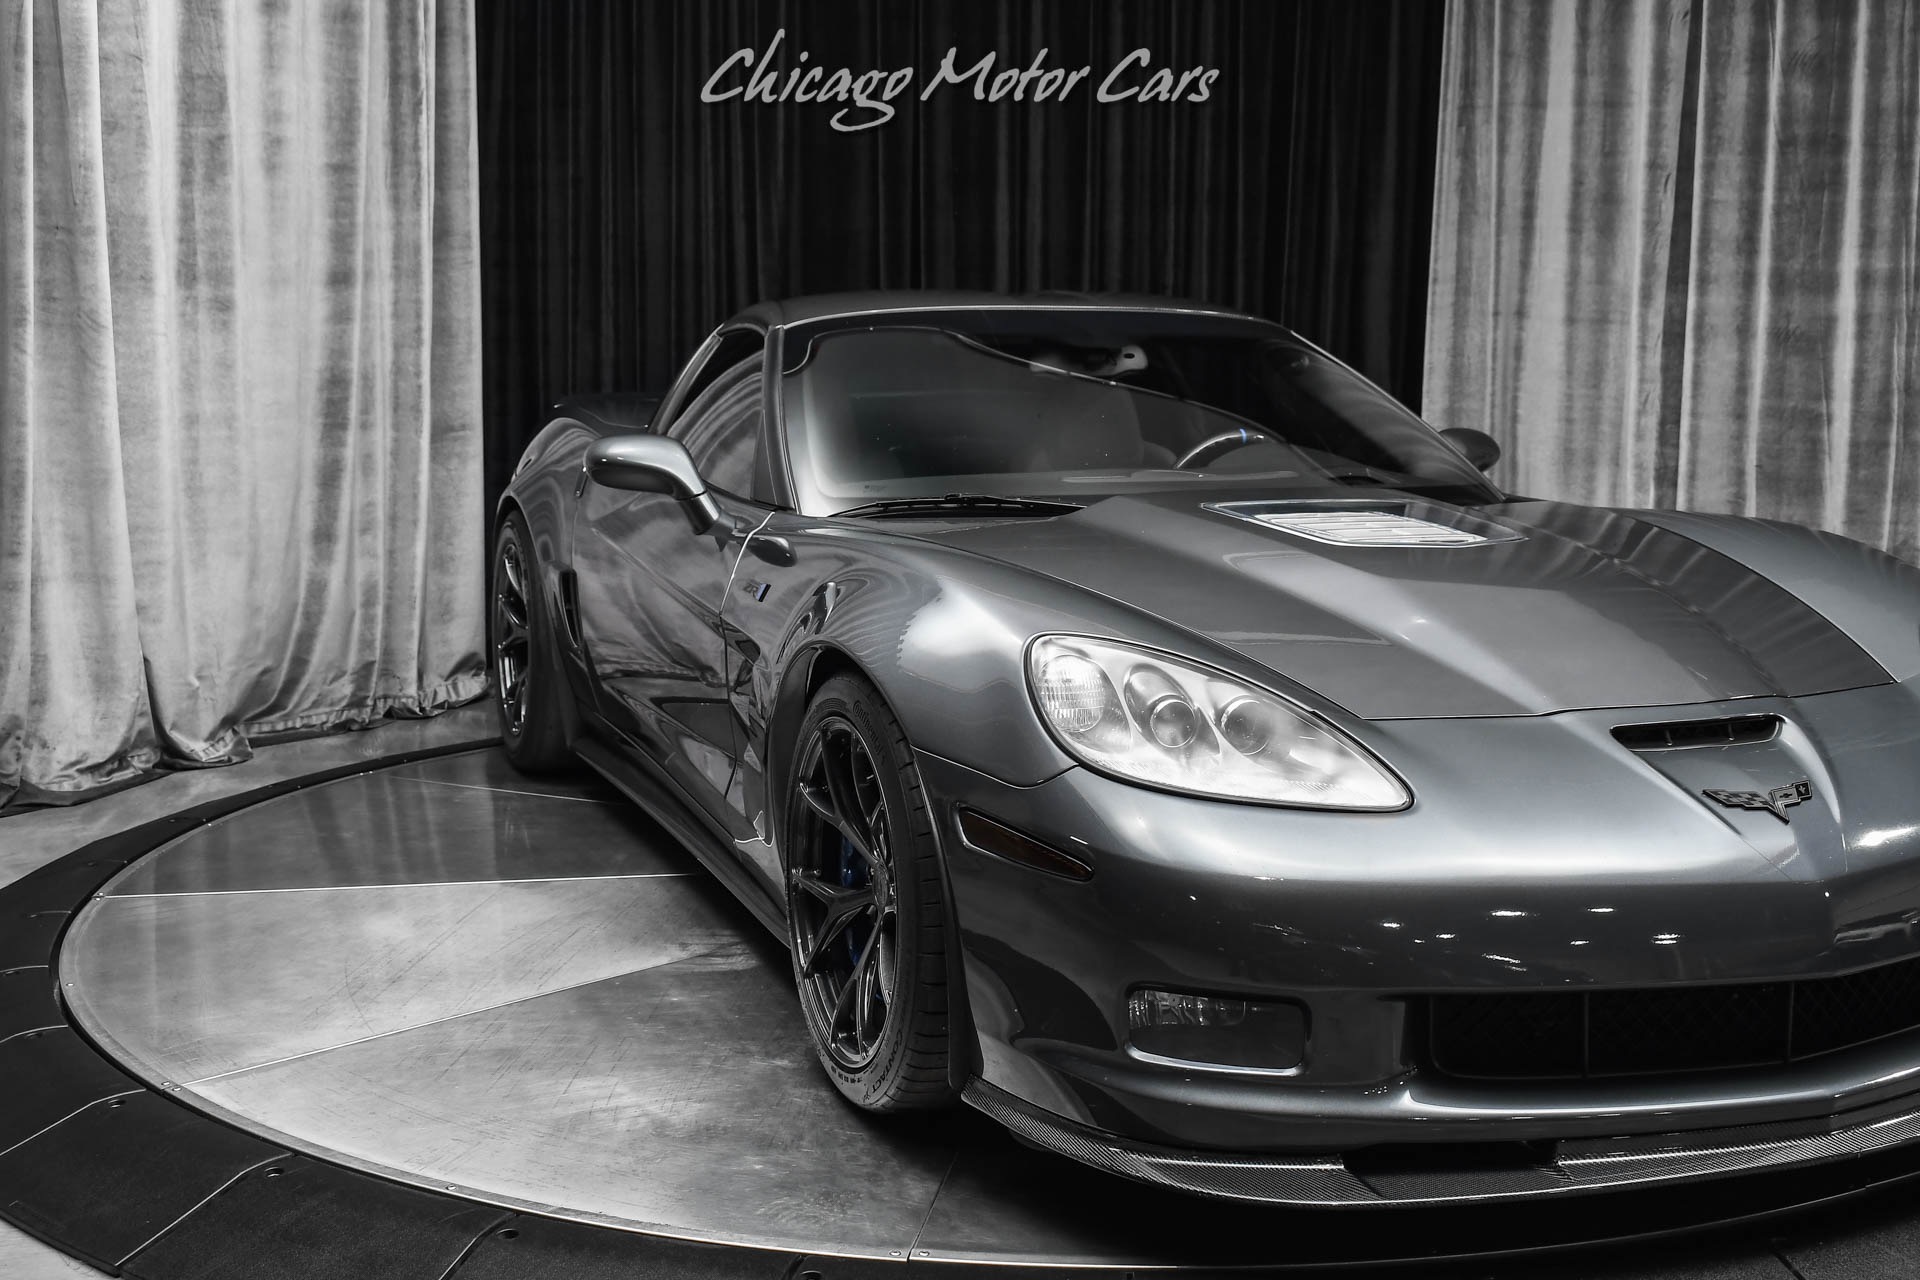 Used-2012-Chevrolet-Corvette-ZR1-Coupe-1000HP-Professionally-Built-THOUSANDS-In-upgrades